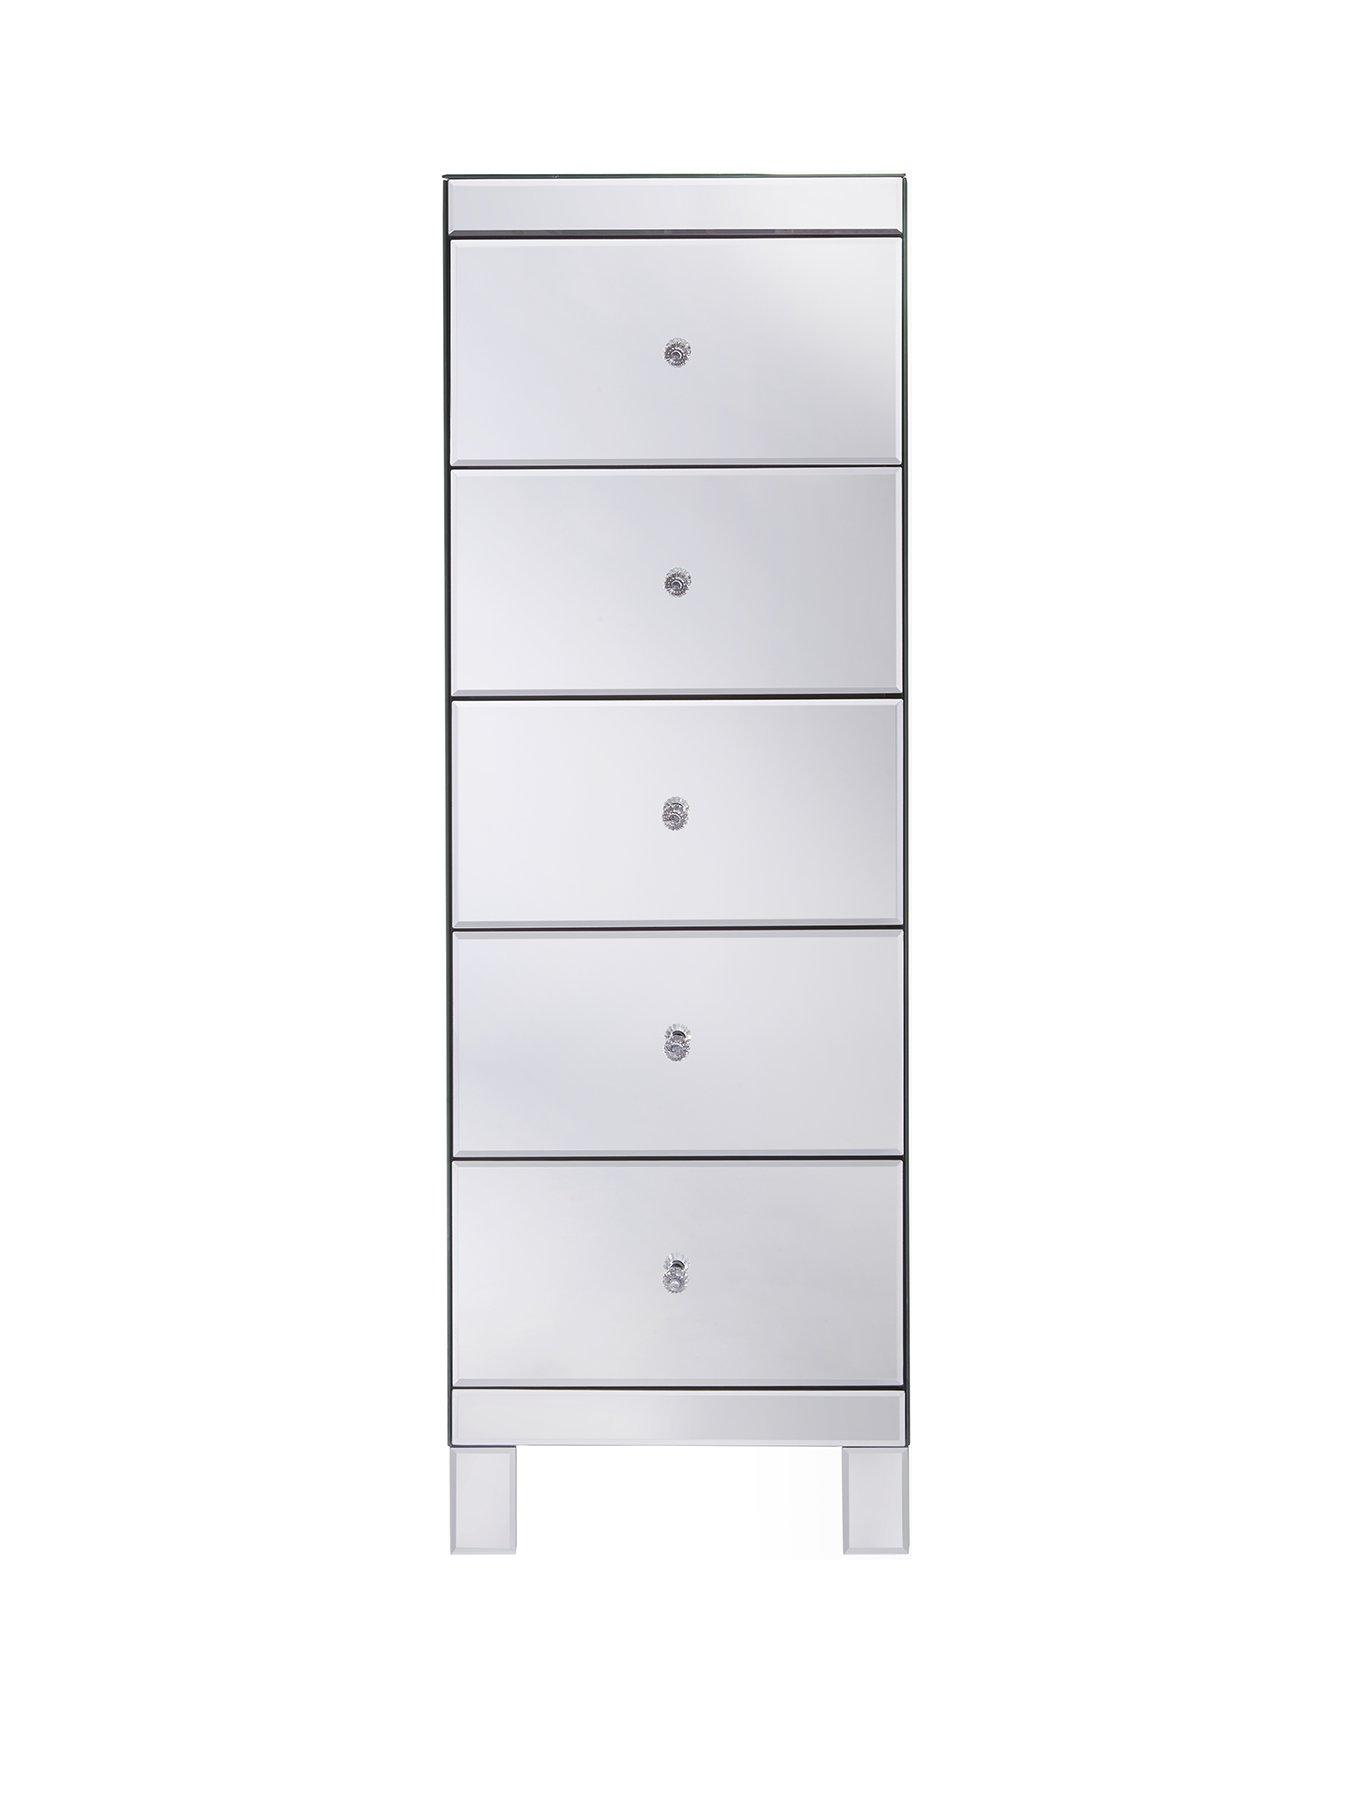 All Offers Bedroom Chest Of Drawers Home Garden Www